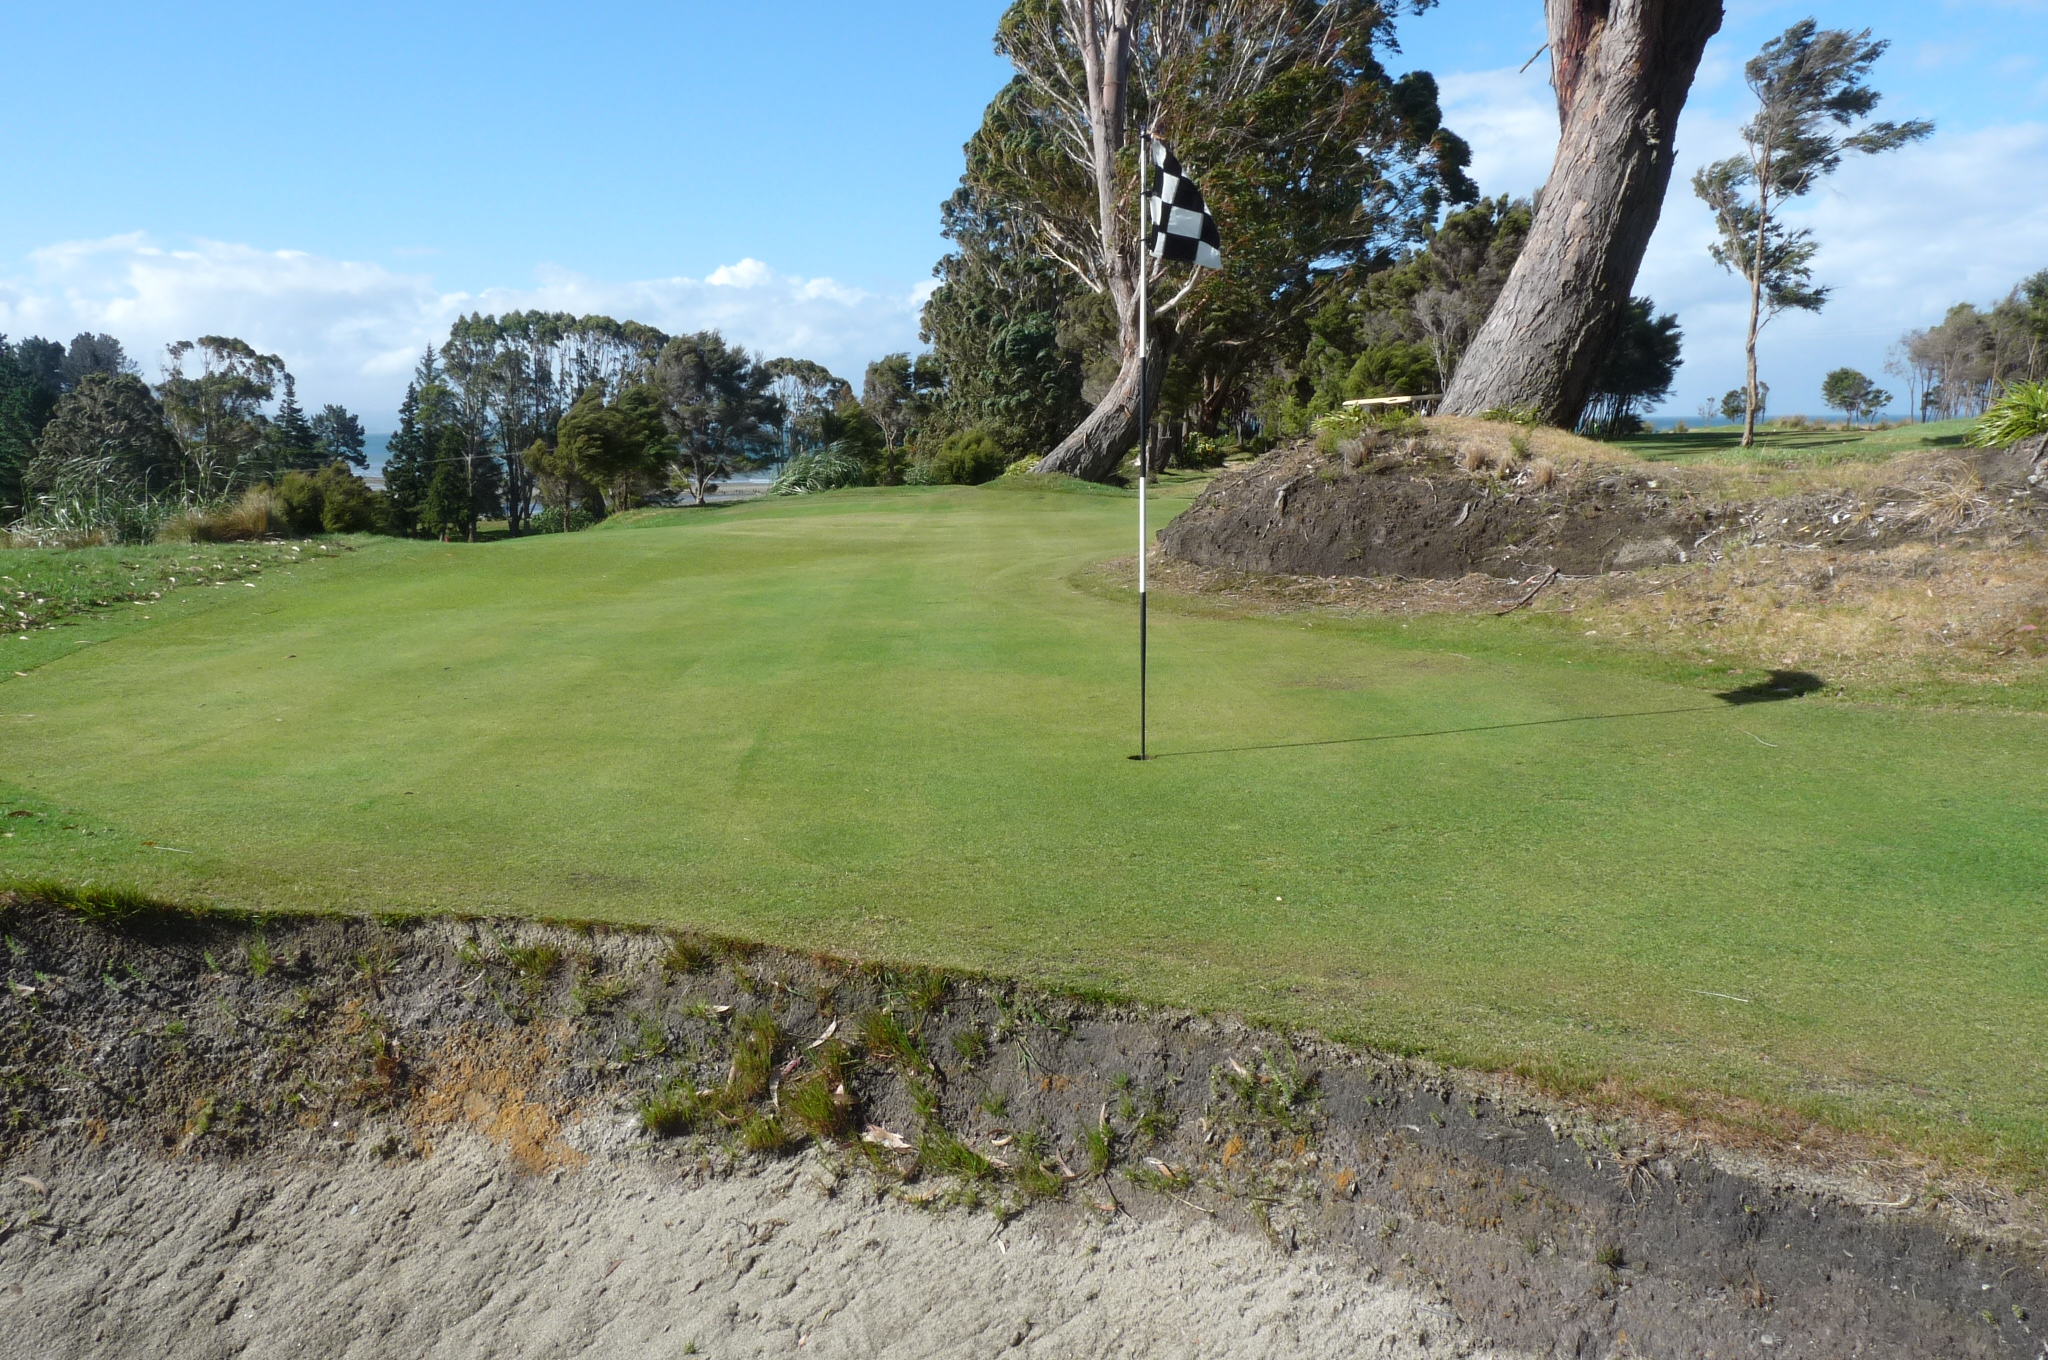 Typical tucked away pin position